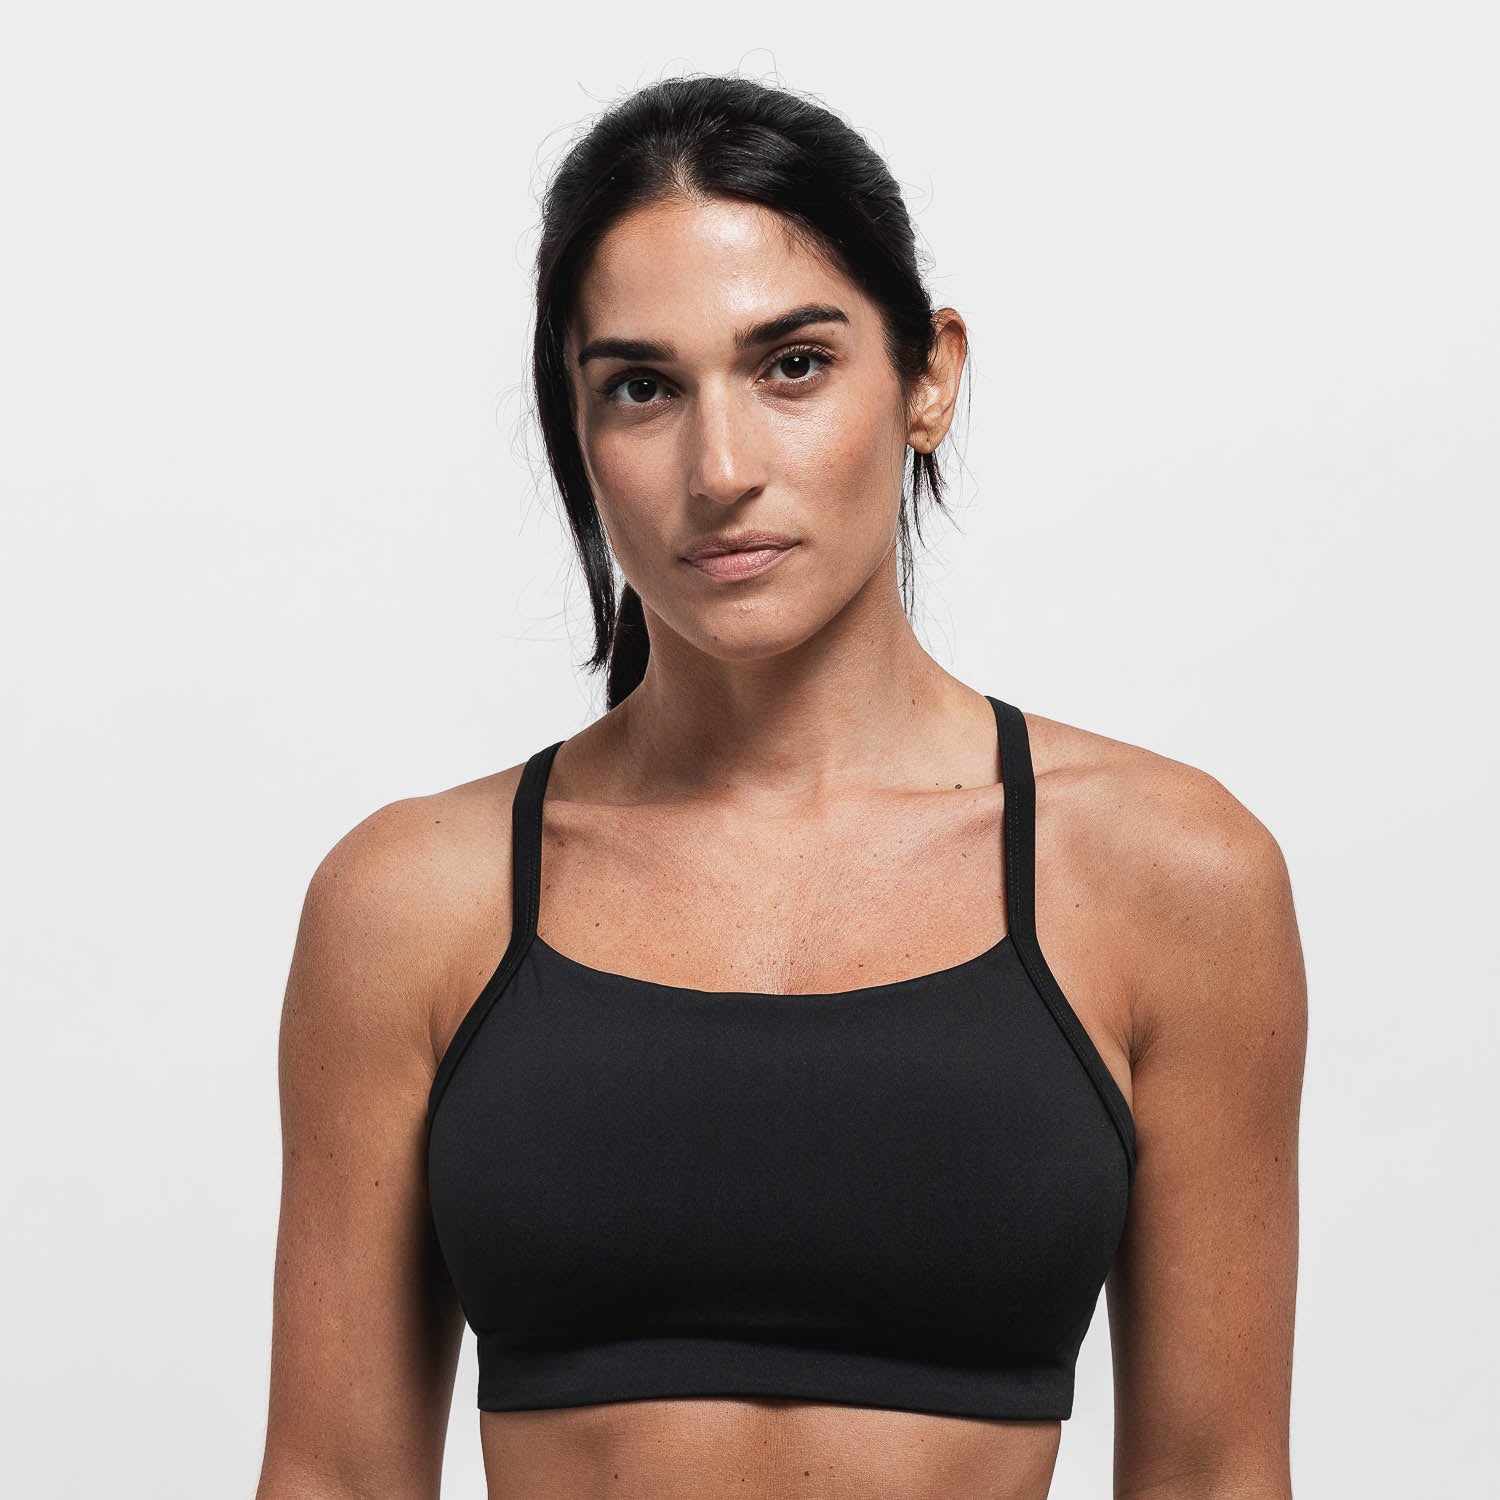 From AA to DDD: The Best Sports Bras for Every Size